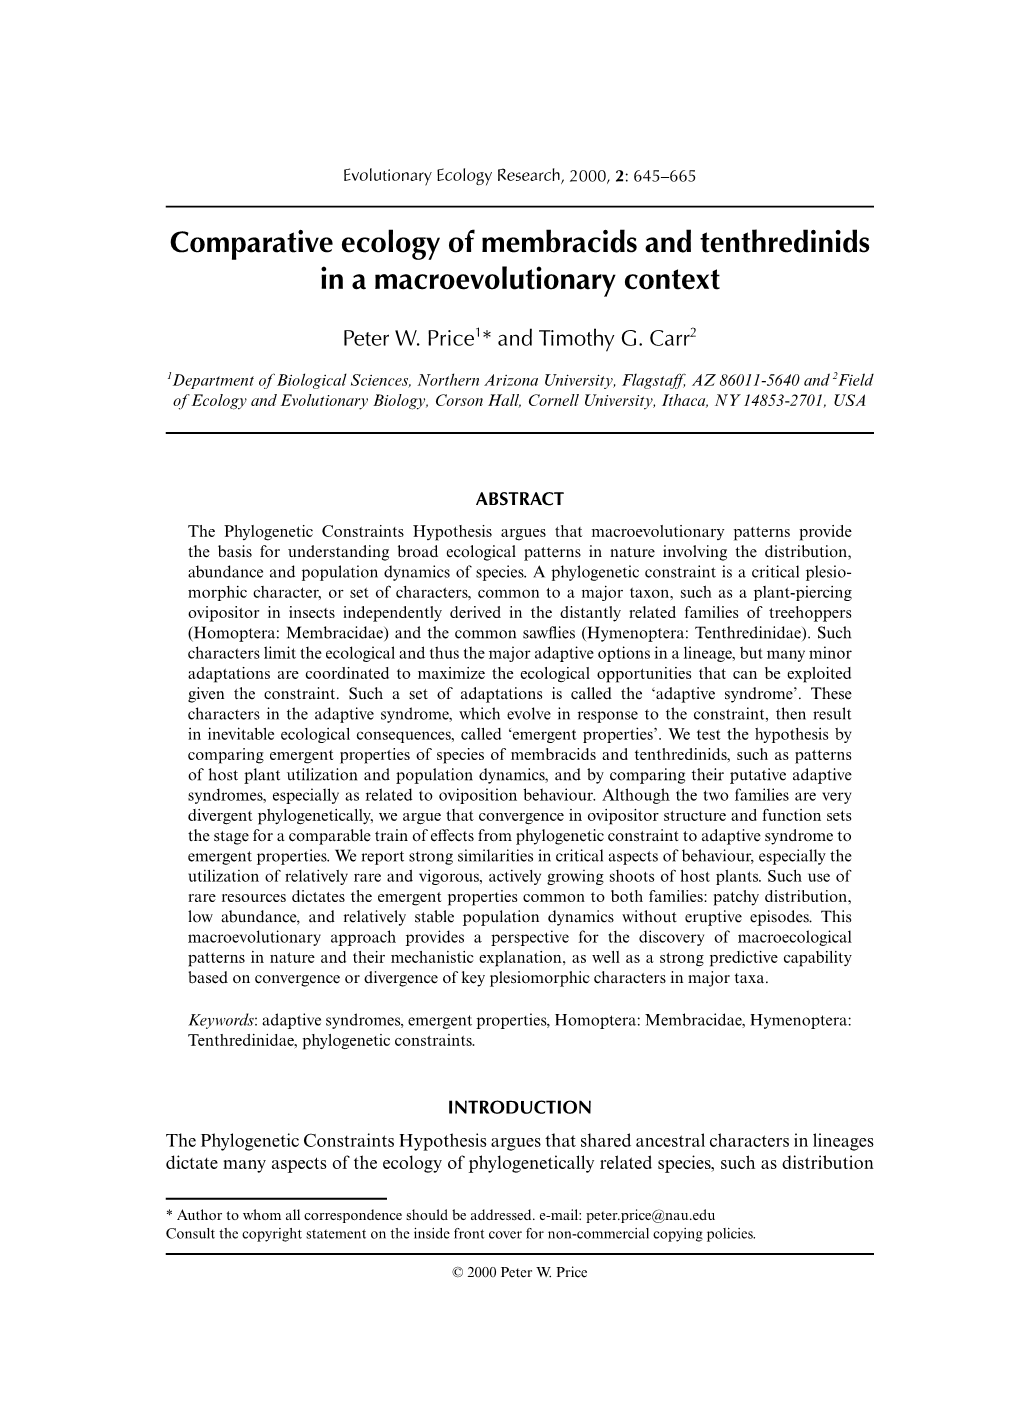 Comparative Ecology of Membracids and Tenthredinids in a Macroevolutionary Context